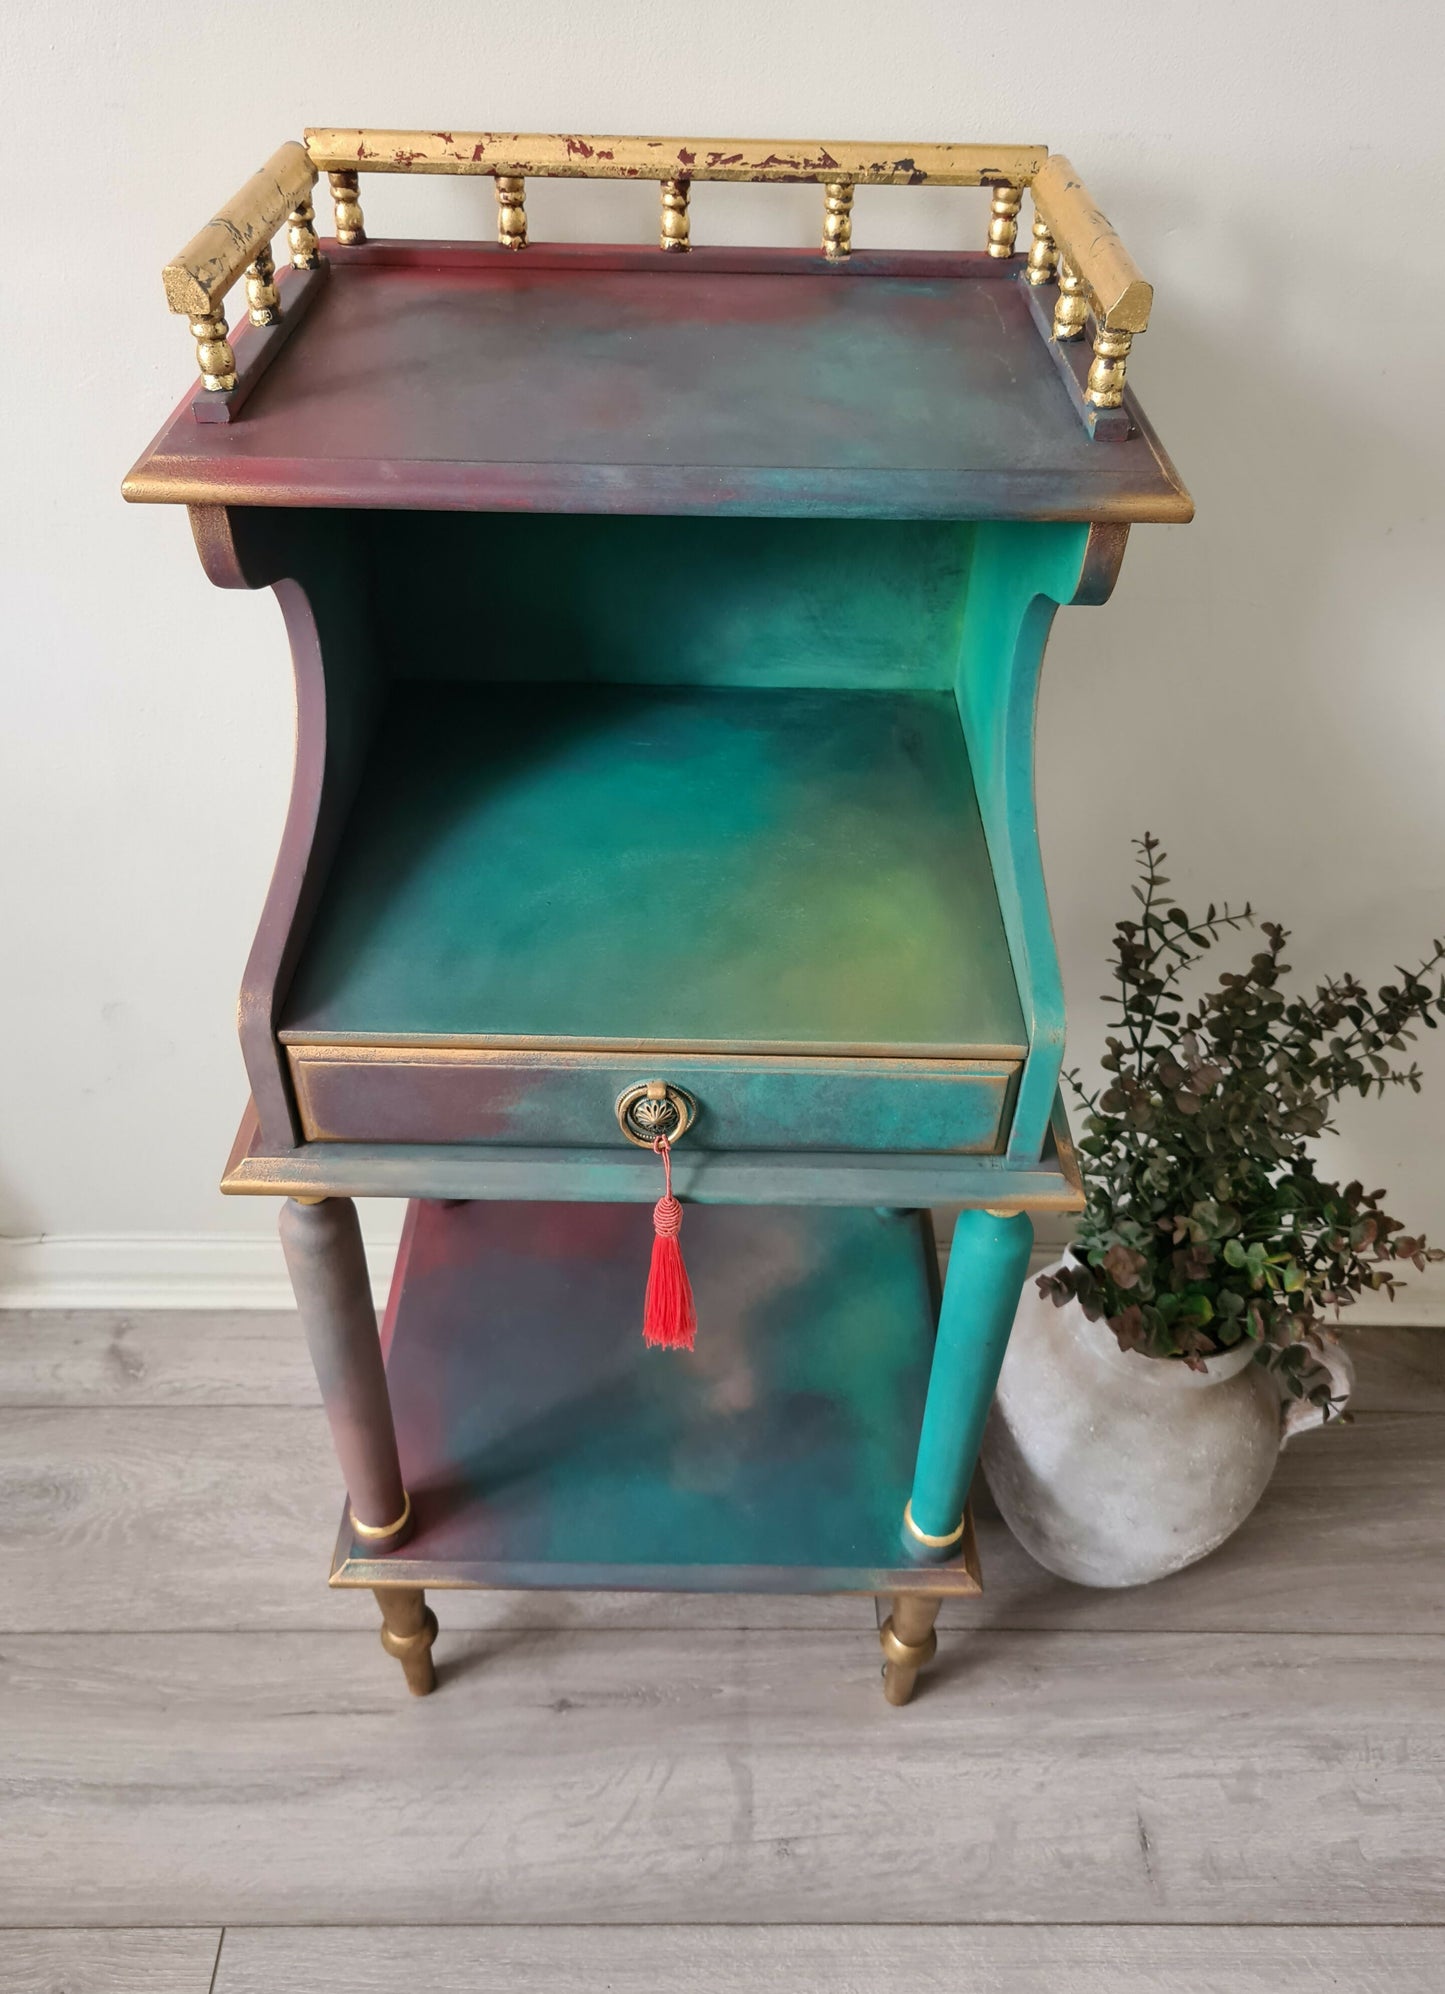 BOHO Bedside Bathroom Cabinet Cupboard Table Nightstand Upcycled Hand Painted